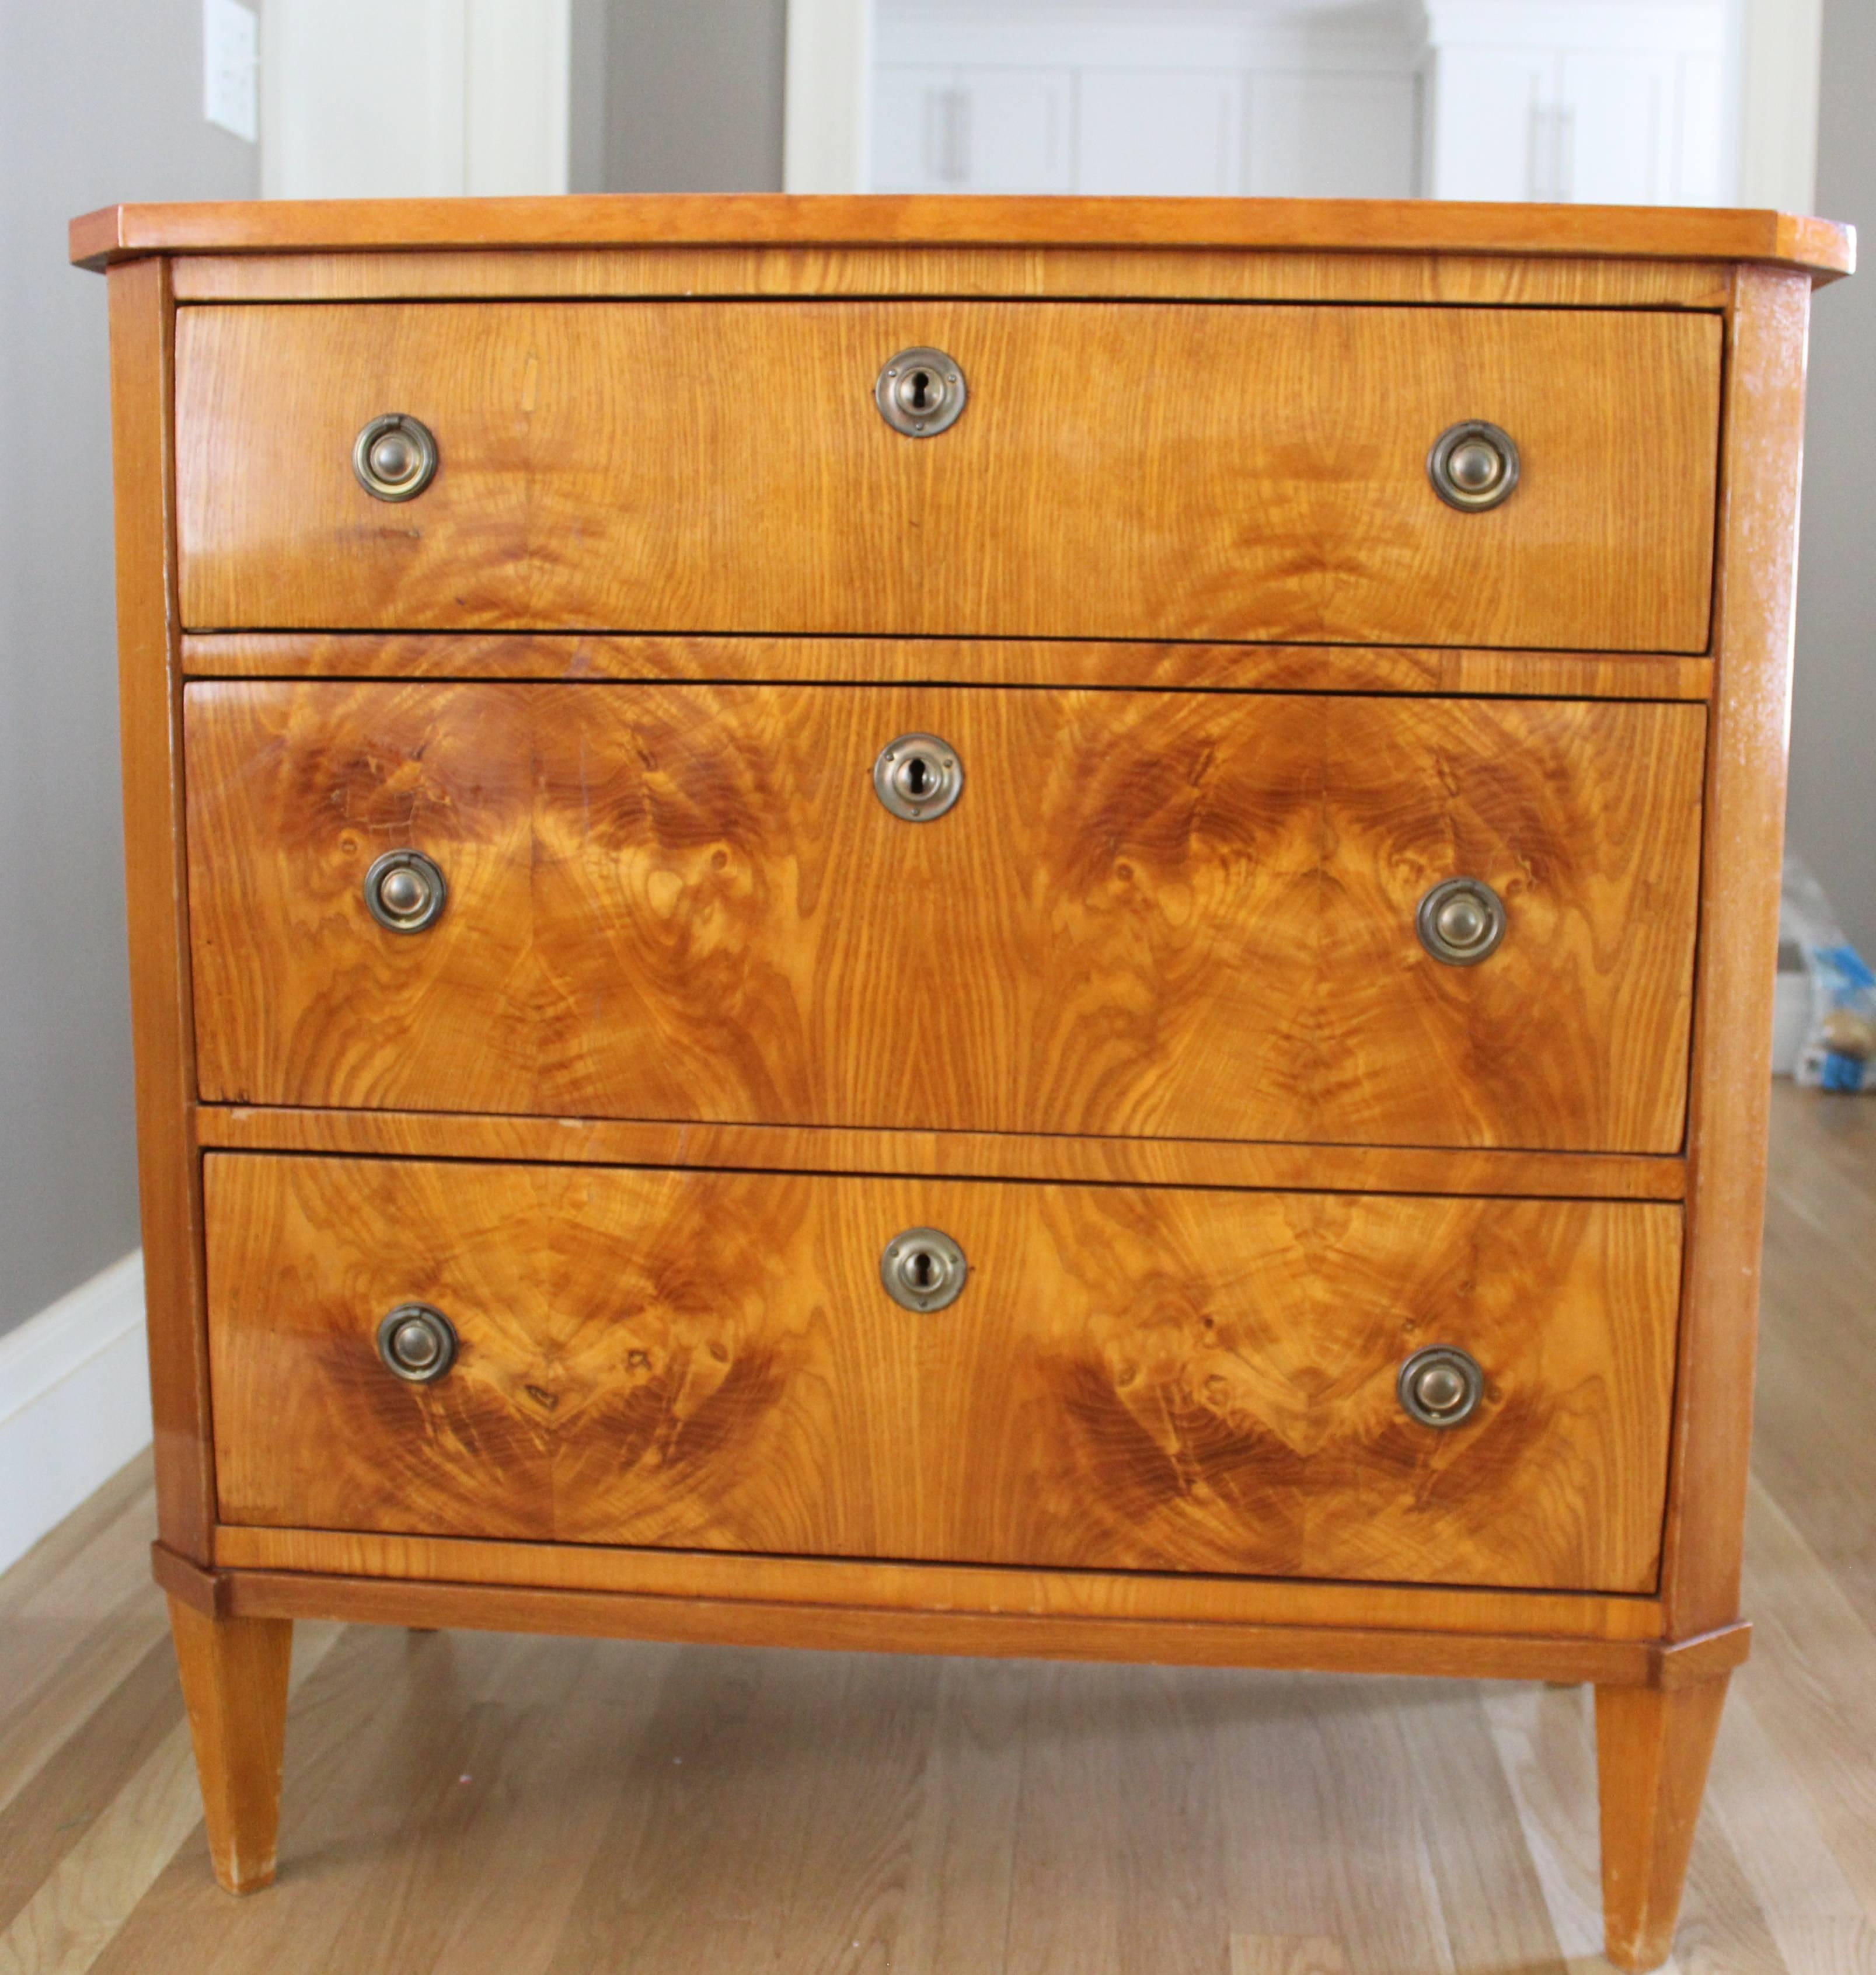 Classic Gustavian chest of drawers, elmwood veneer with beautiful mirrored design on the front, three central drawers, original pulls and escutcheons ending on tapered square legs. In good condition.